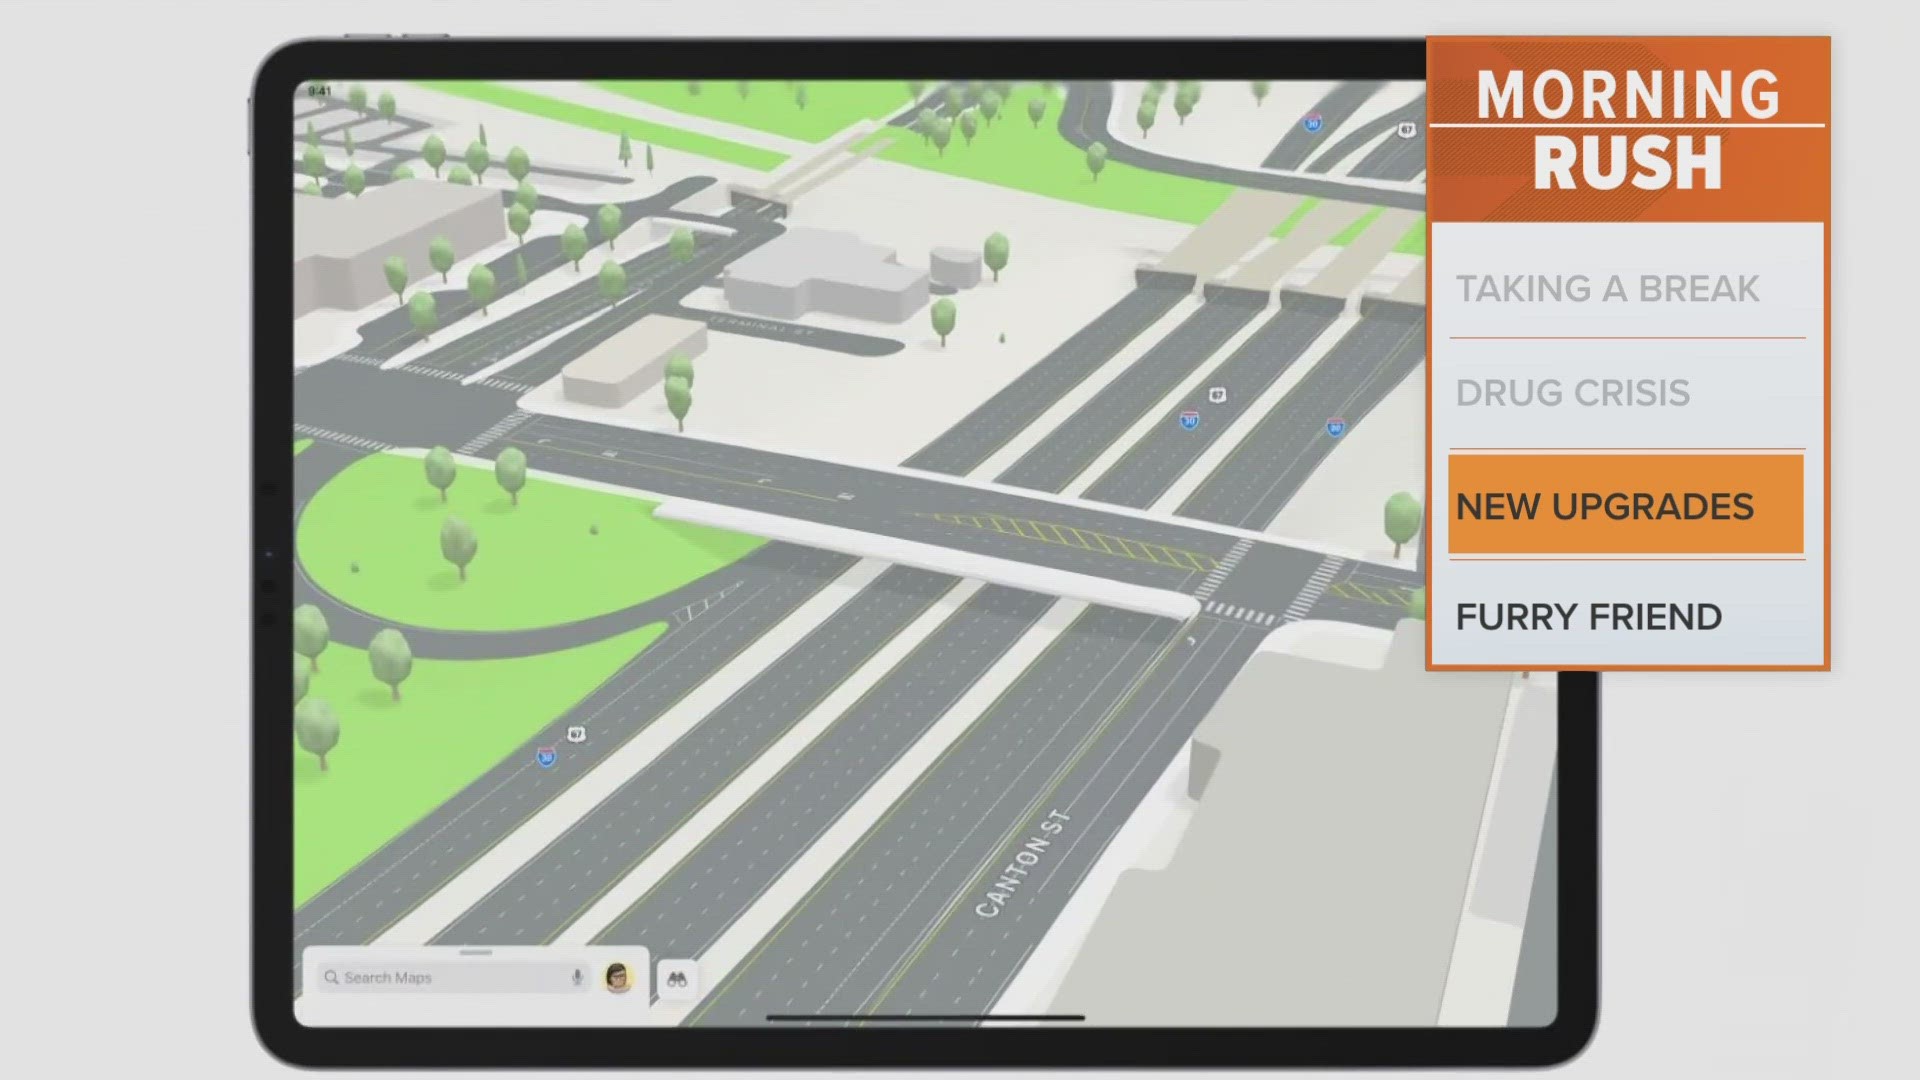 There is a new "windshield view" for drivers when approaching complex interchanges, custom-designed 3D landmarks and more!